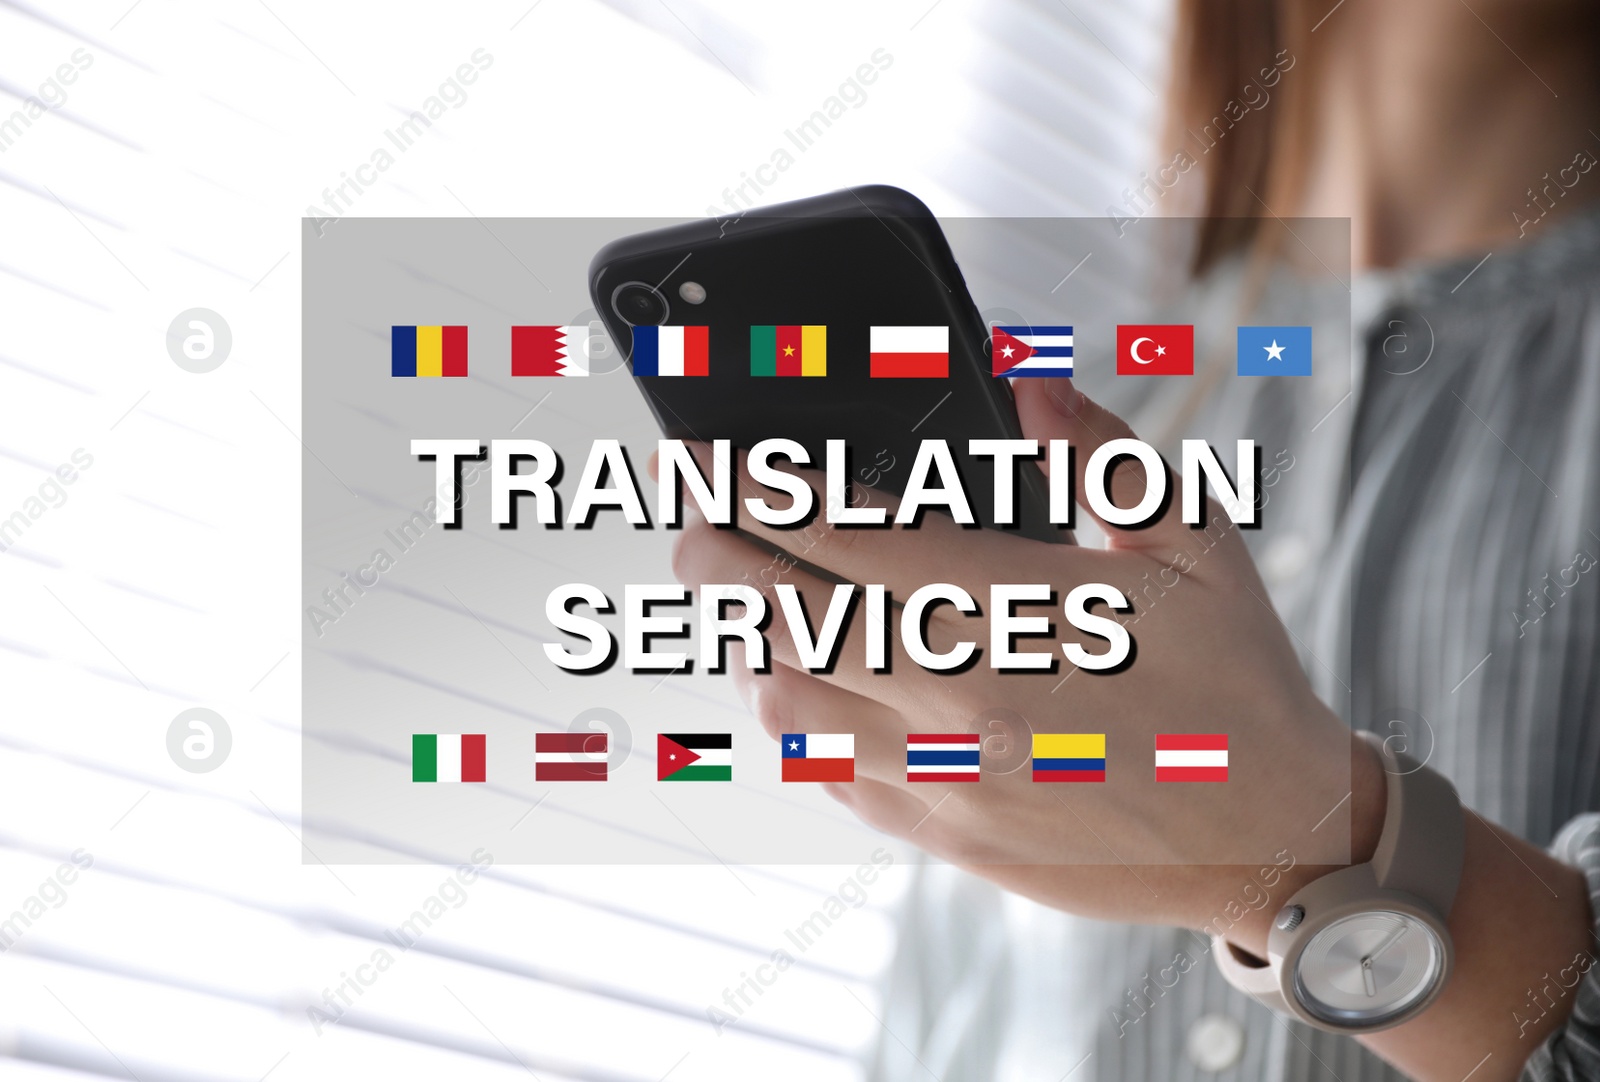 Image of Translation services. Woman holding smartphone indoors, closeup